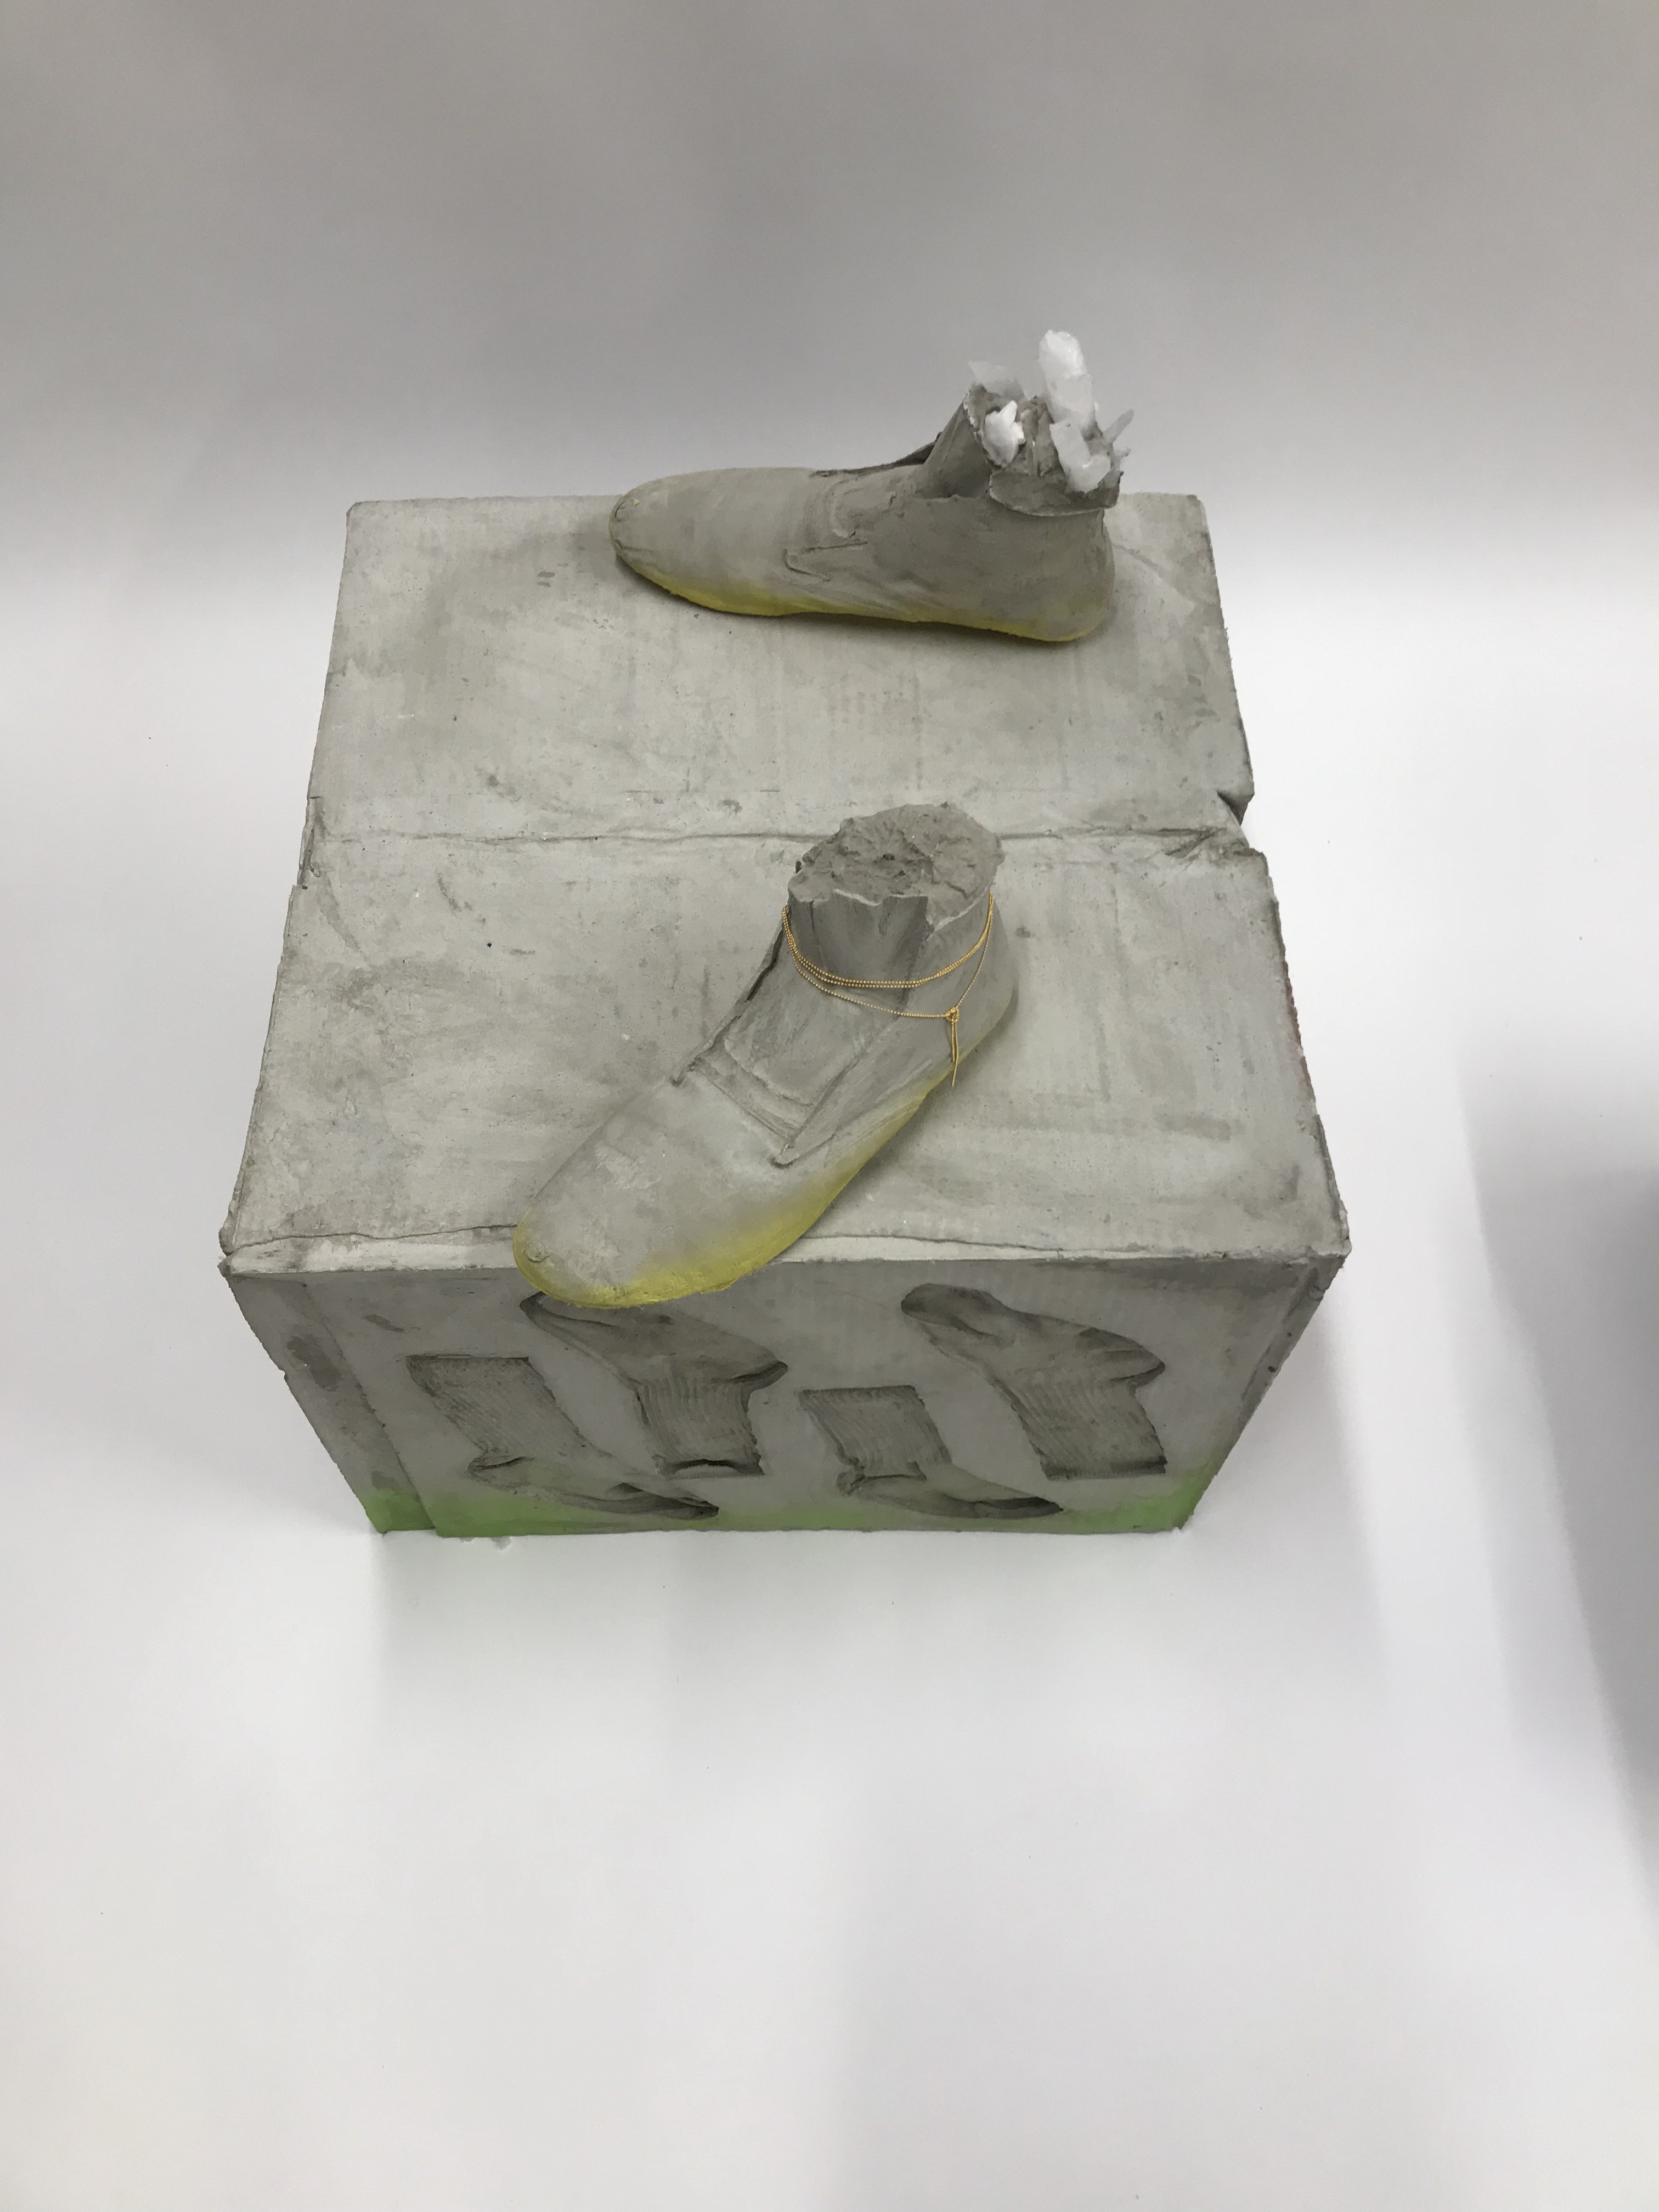 Sculpture by Rachel Walters in cast concrete with jewellery and pigment titled Something about your face, the sun and the shadows